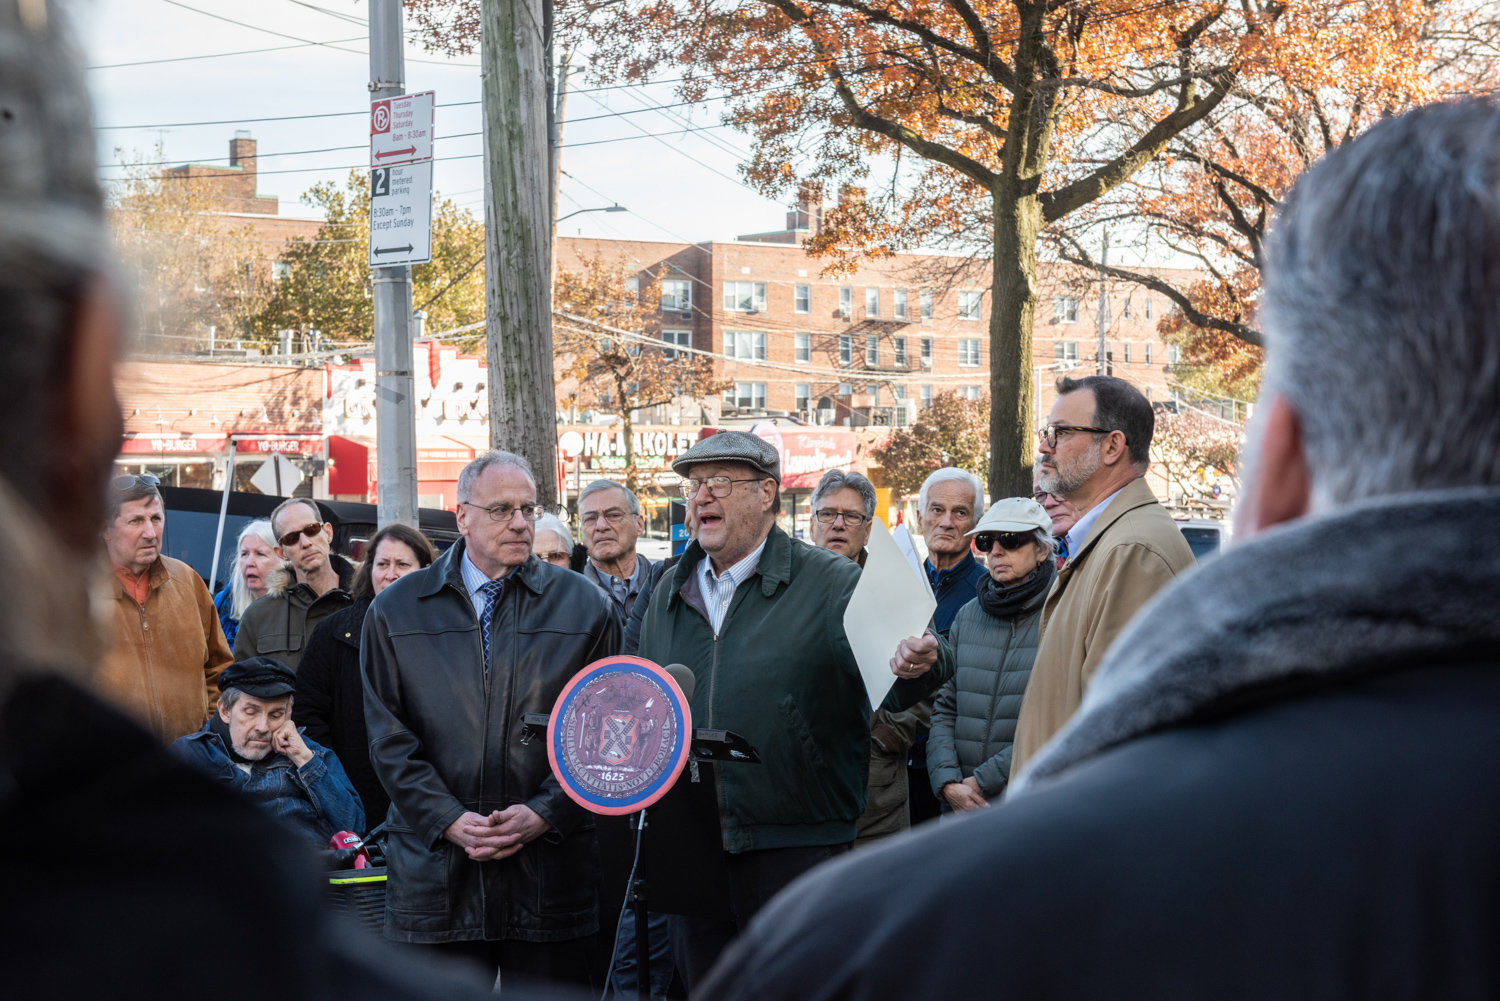 Jim Grossman, who lives less than a block from an empty lot on Riverdale Avenue near West 238th Street, speaks out against Montefiore Medical Center’s reported plan to build a 10-story health care facility there.